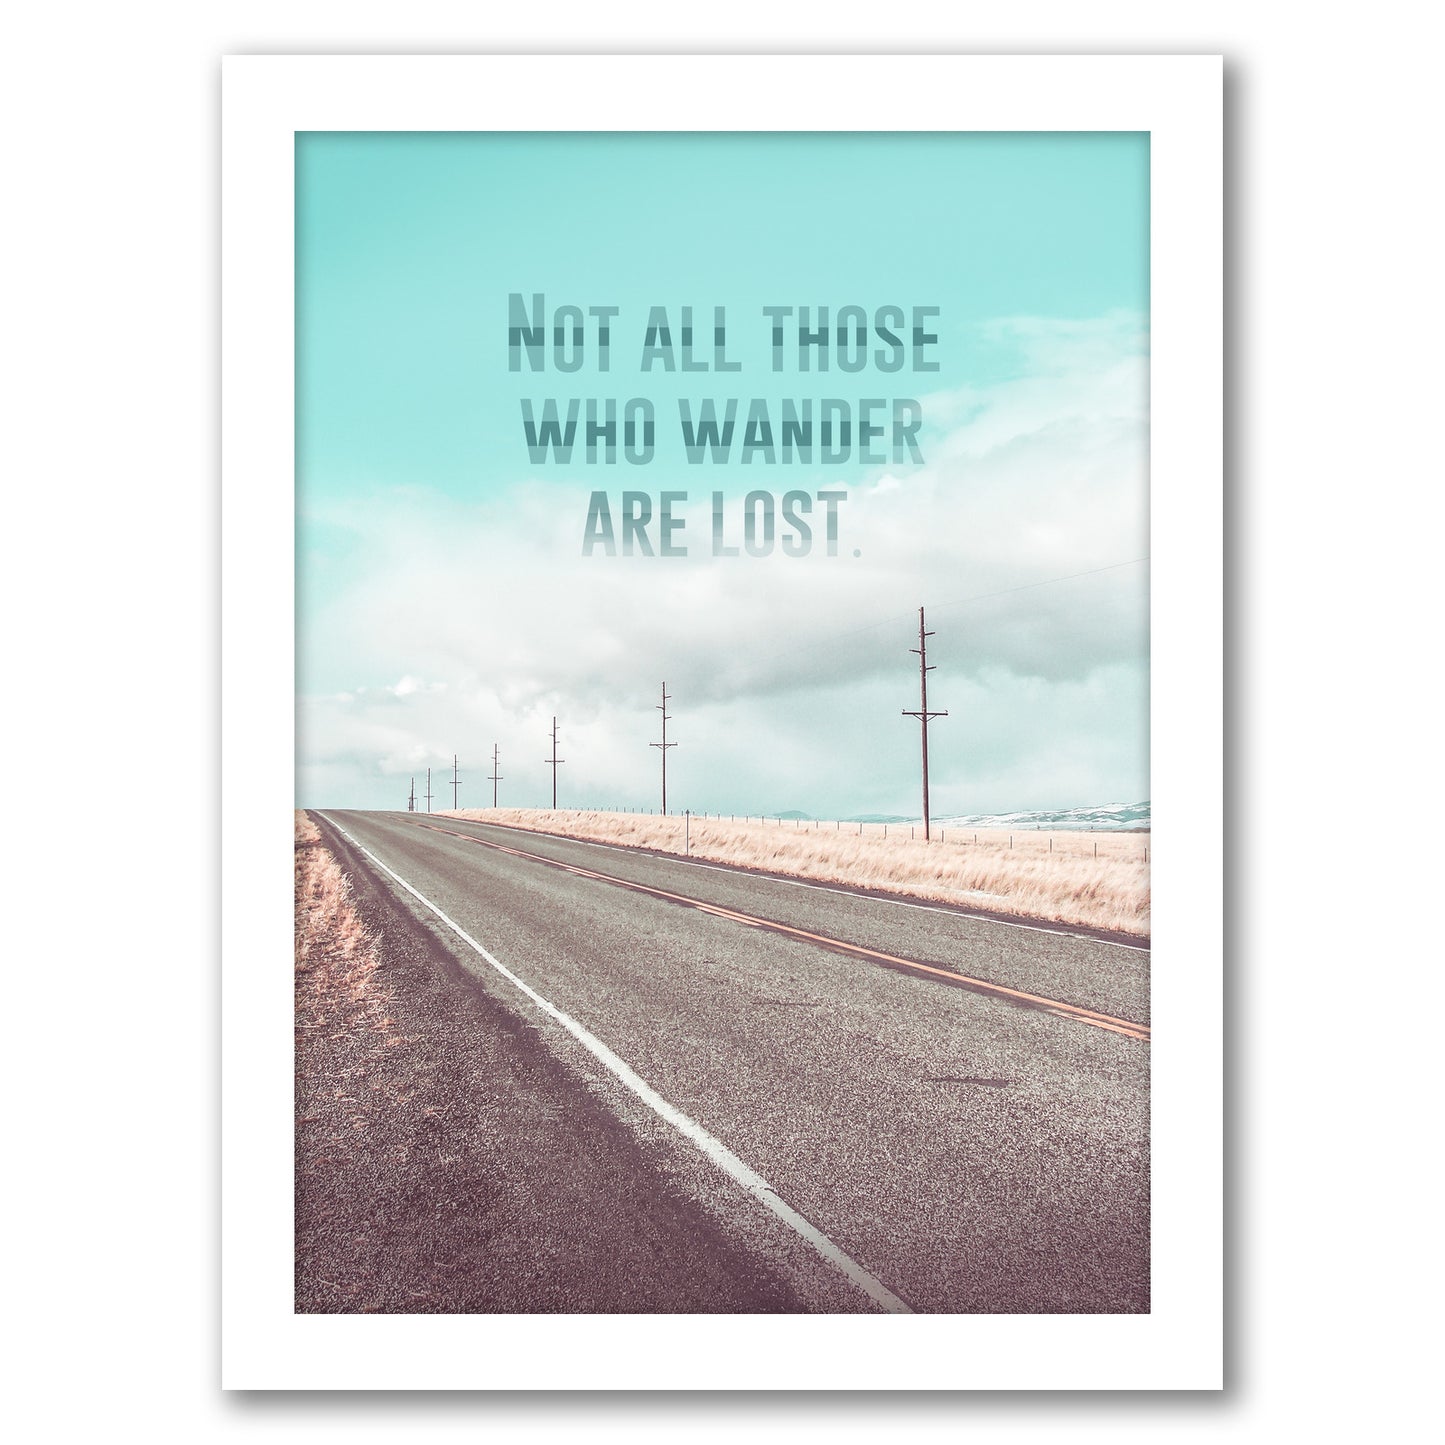 Those Who Wander by Annie Bailey - Framed Print